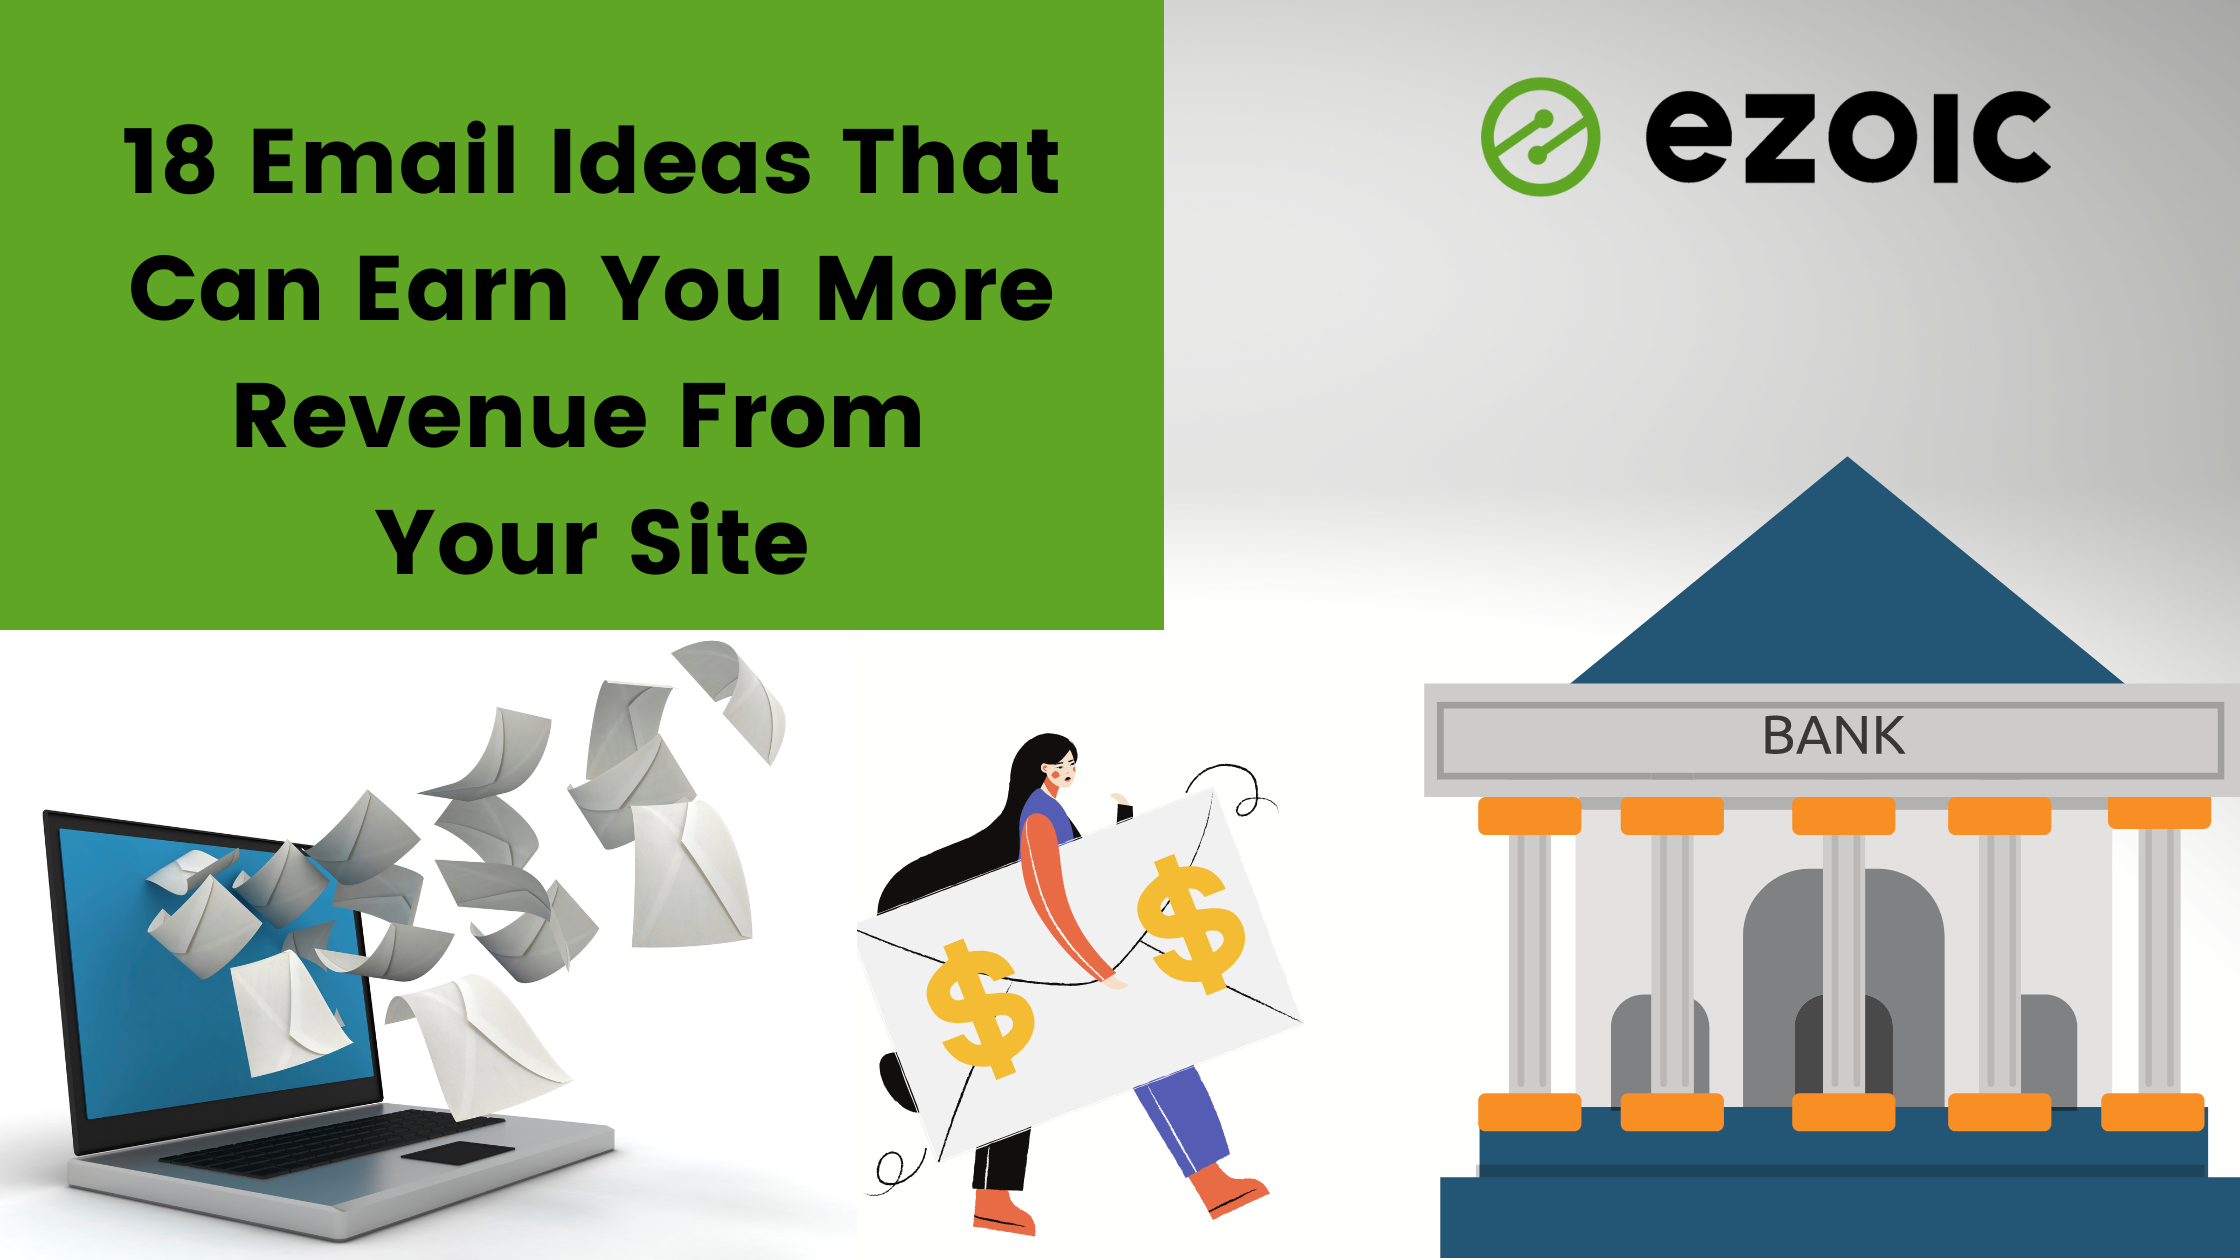 18 Email Ideas That Can Earn You More Revenue From Your Site